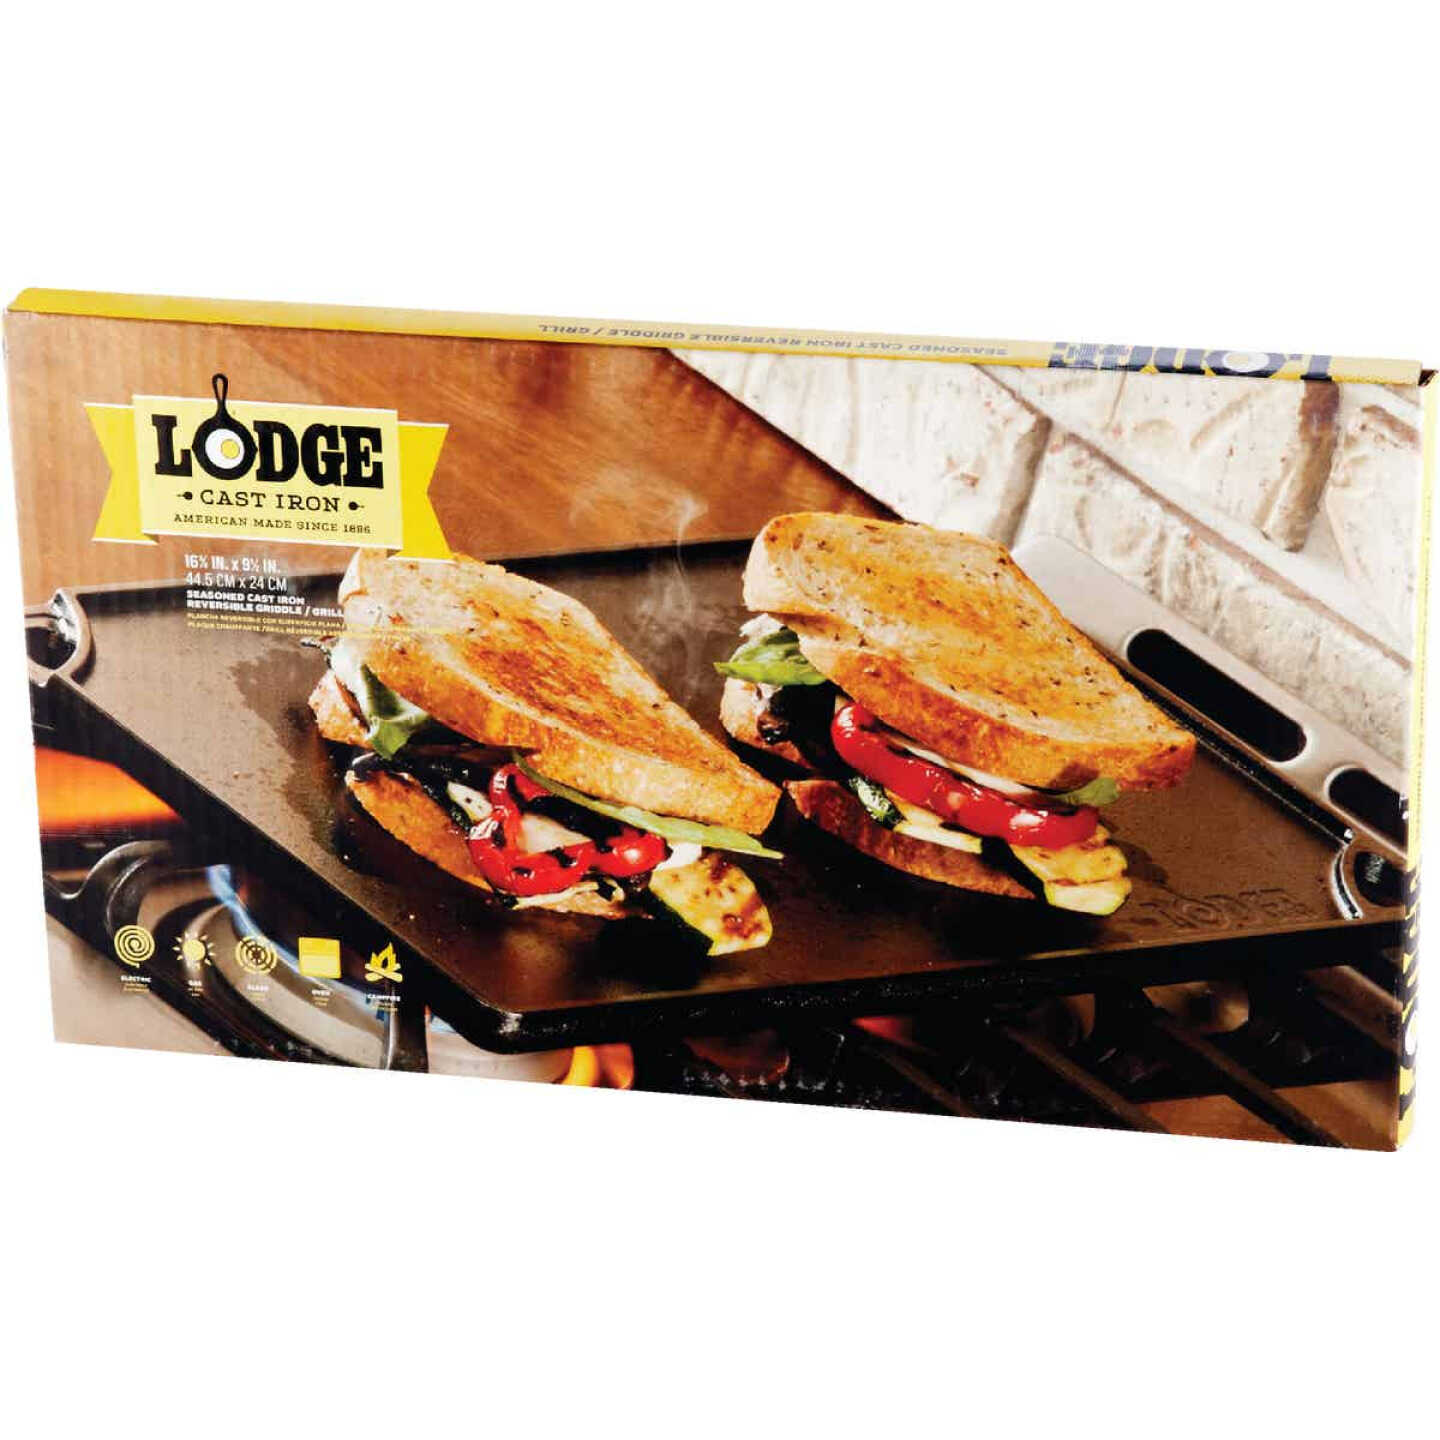 Lodge 9.5 In. x 16.75 In. Cast Iron Griddle Grill - Dunham's